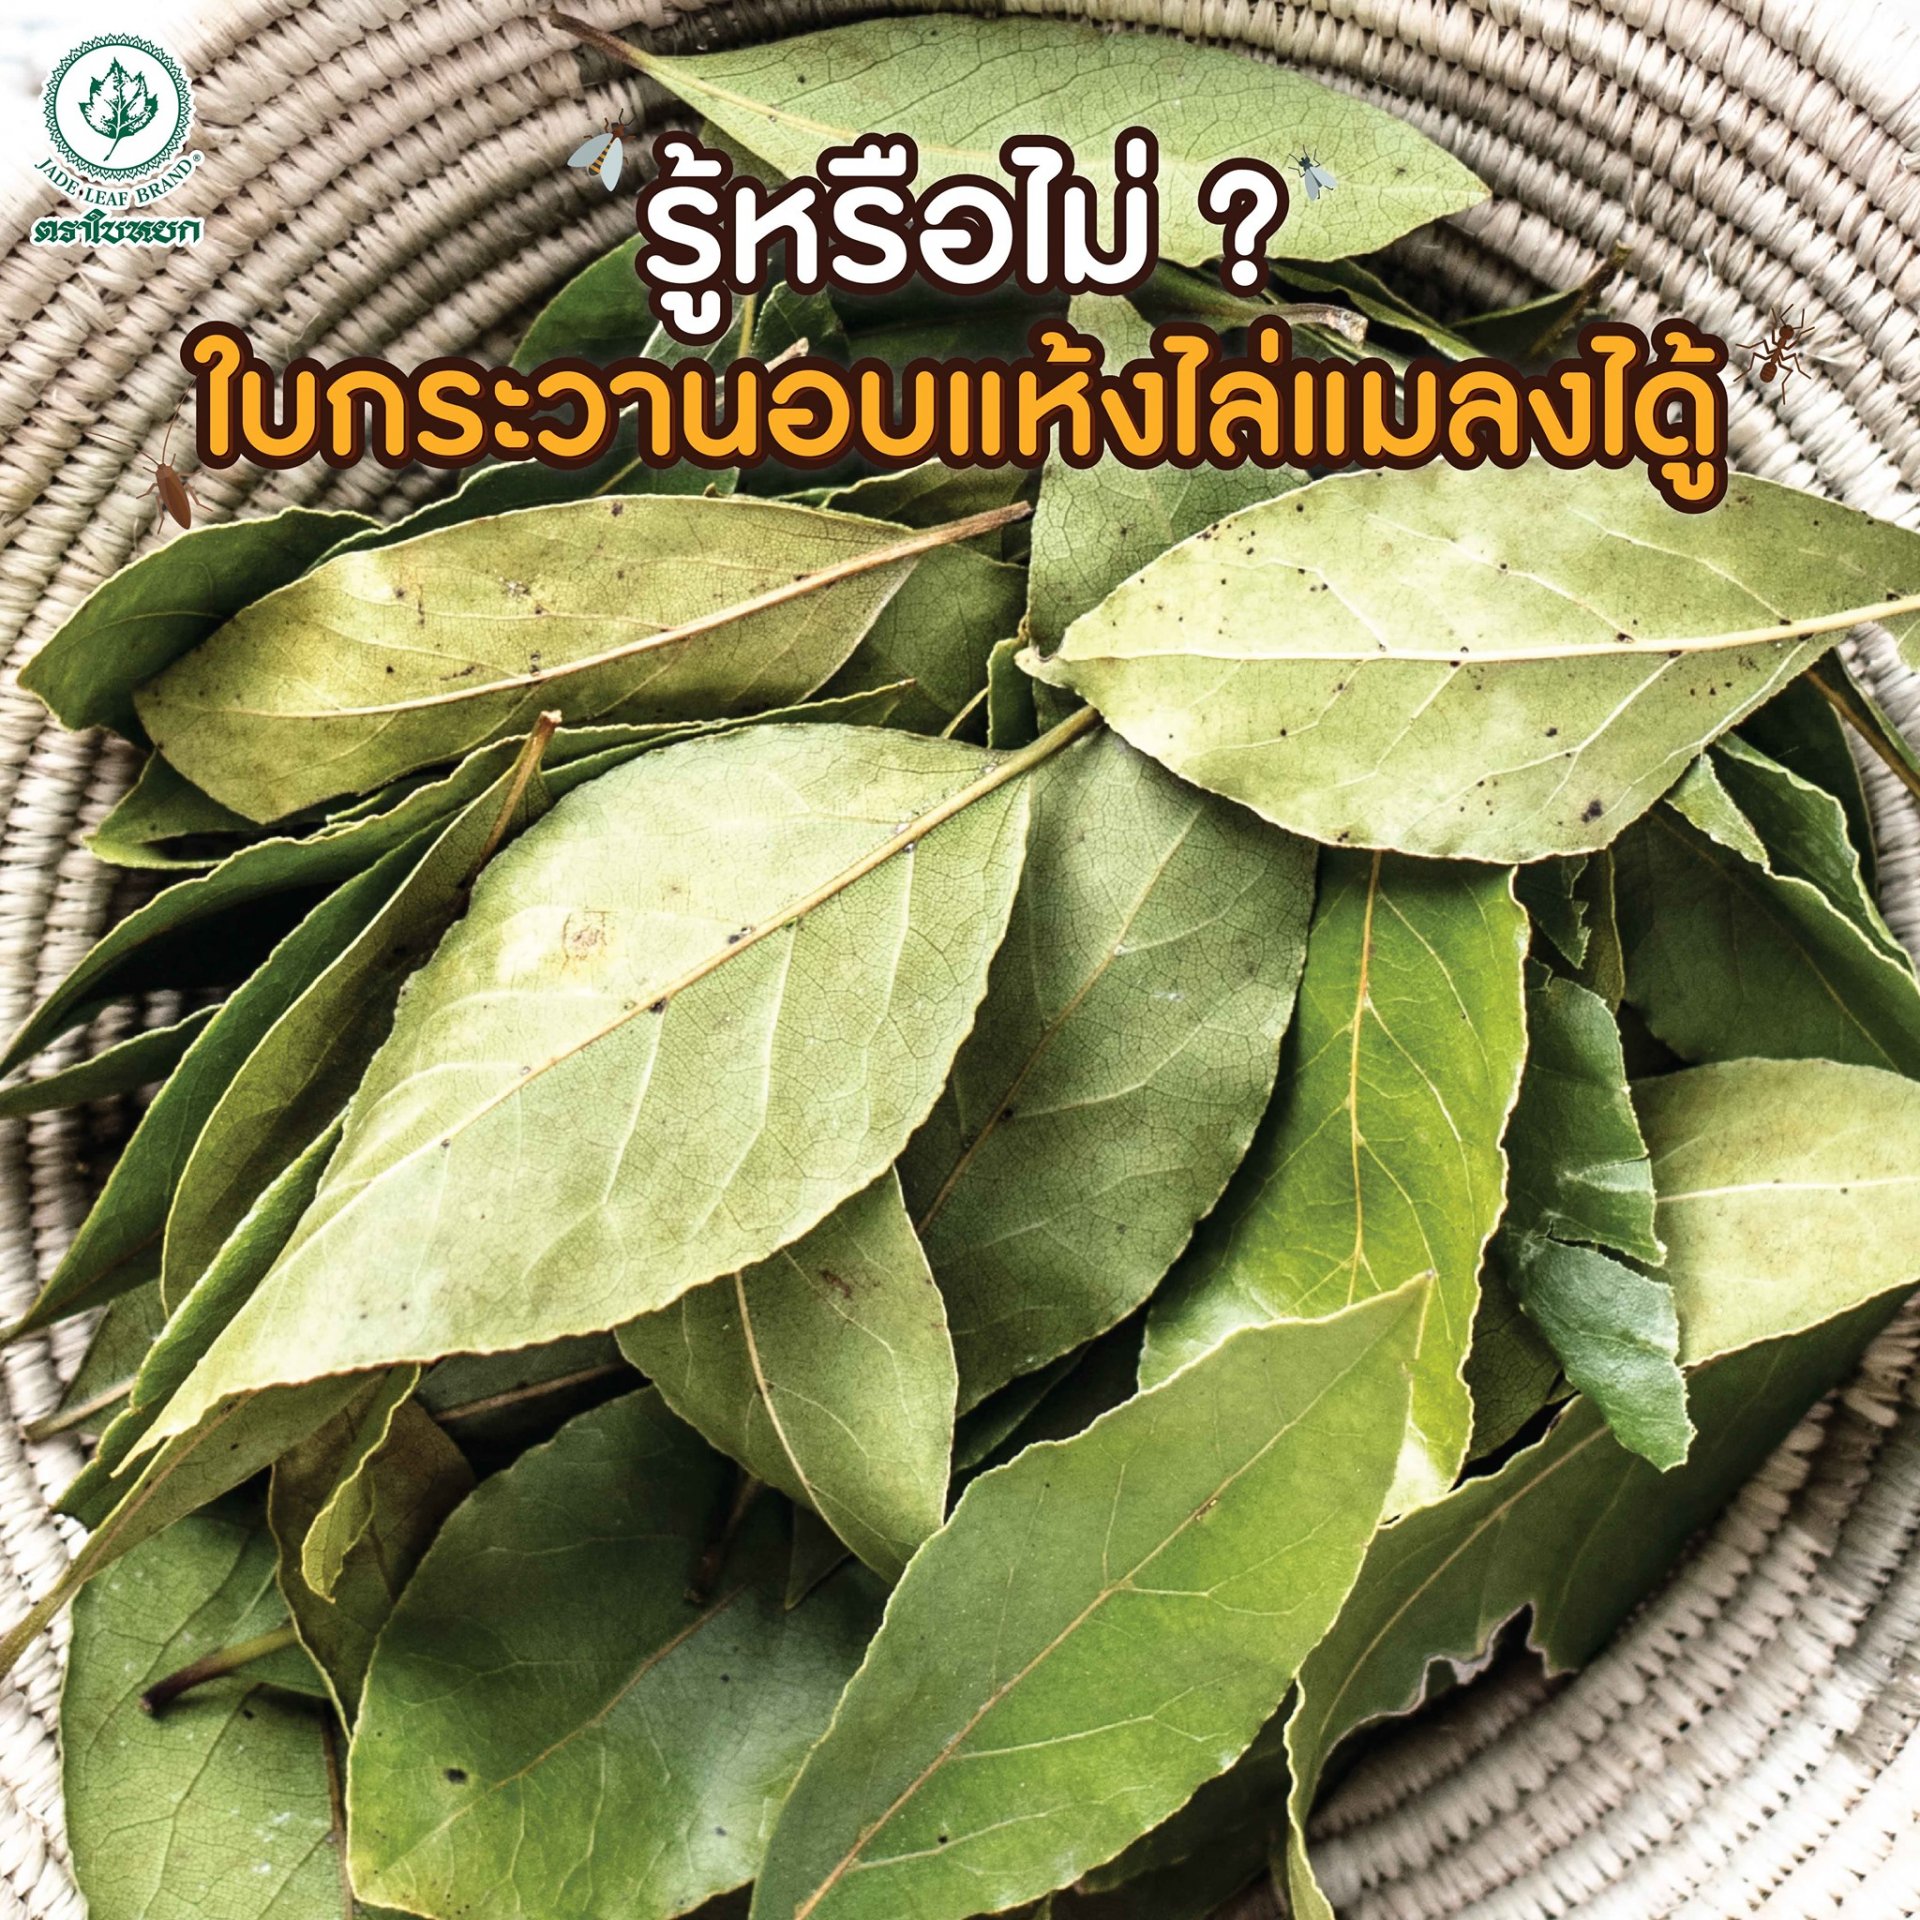 Believe or not! Dried bay leaf can ward off insects